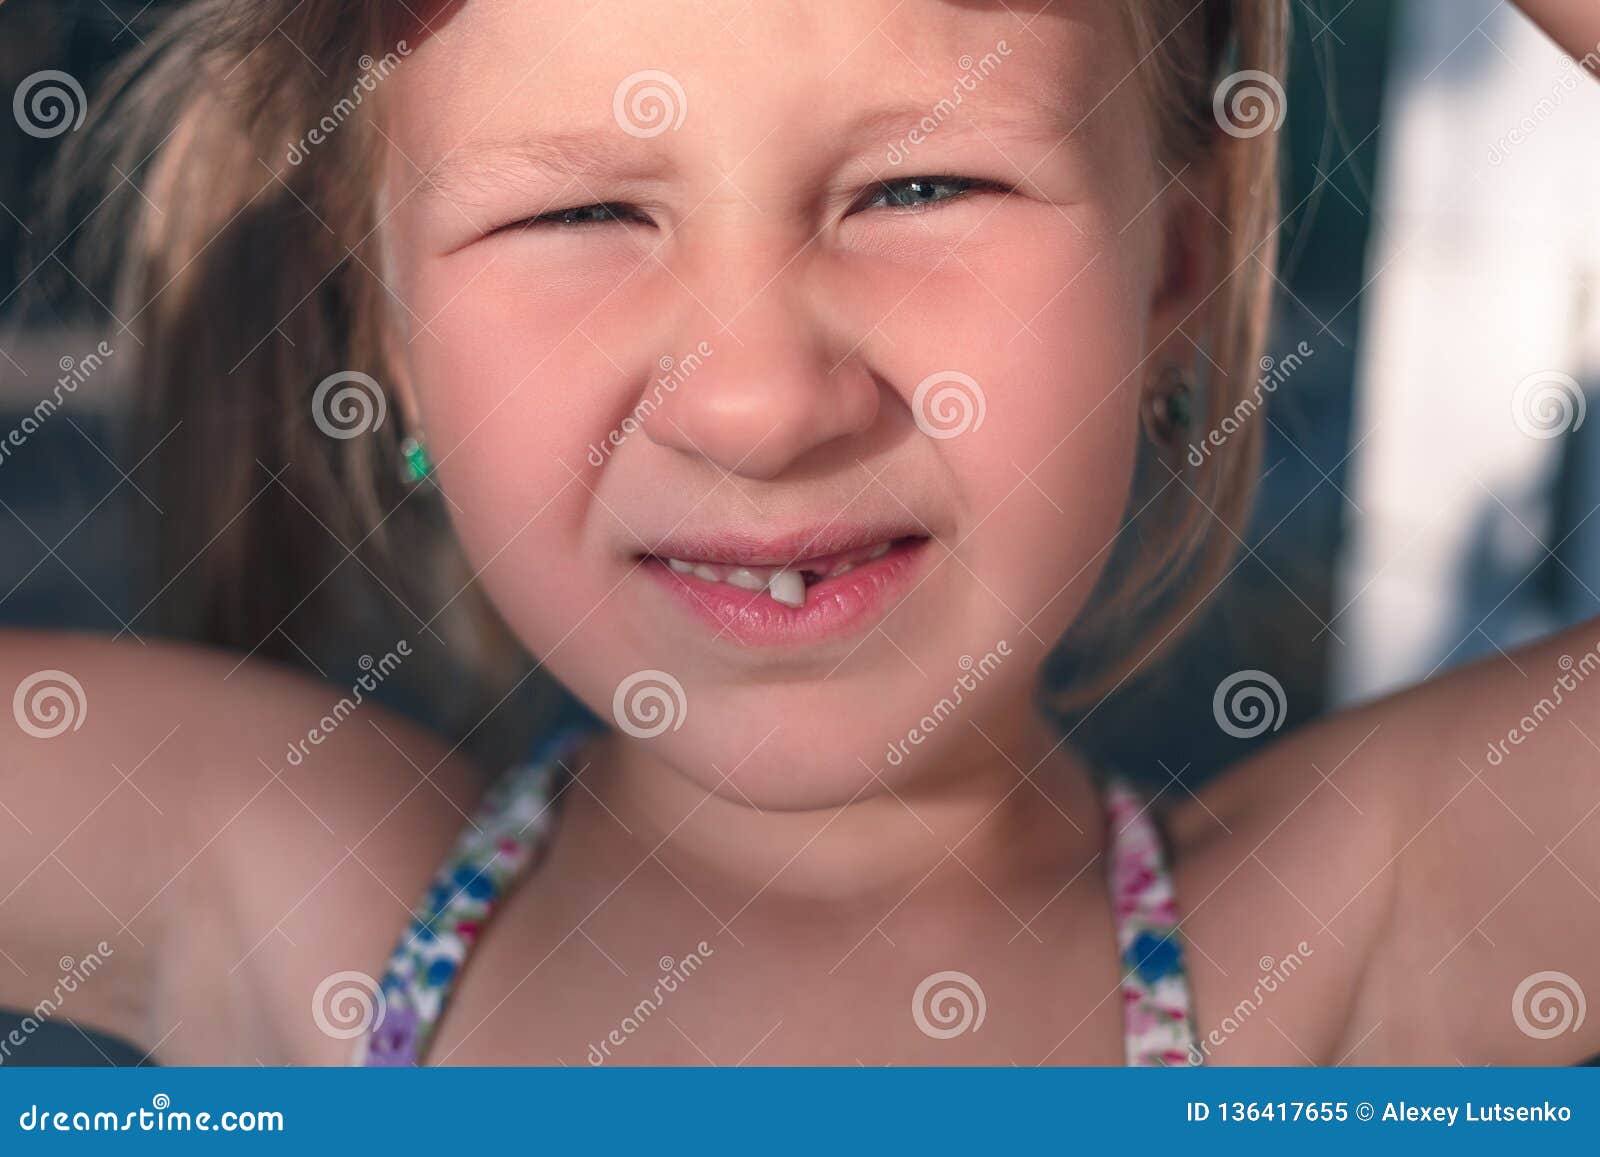 Portrait Of A Little Girl With A Wobbly Baby Tooth Stock Image Image